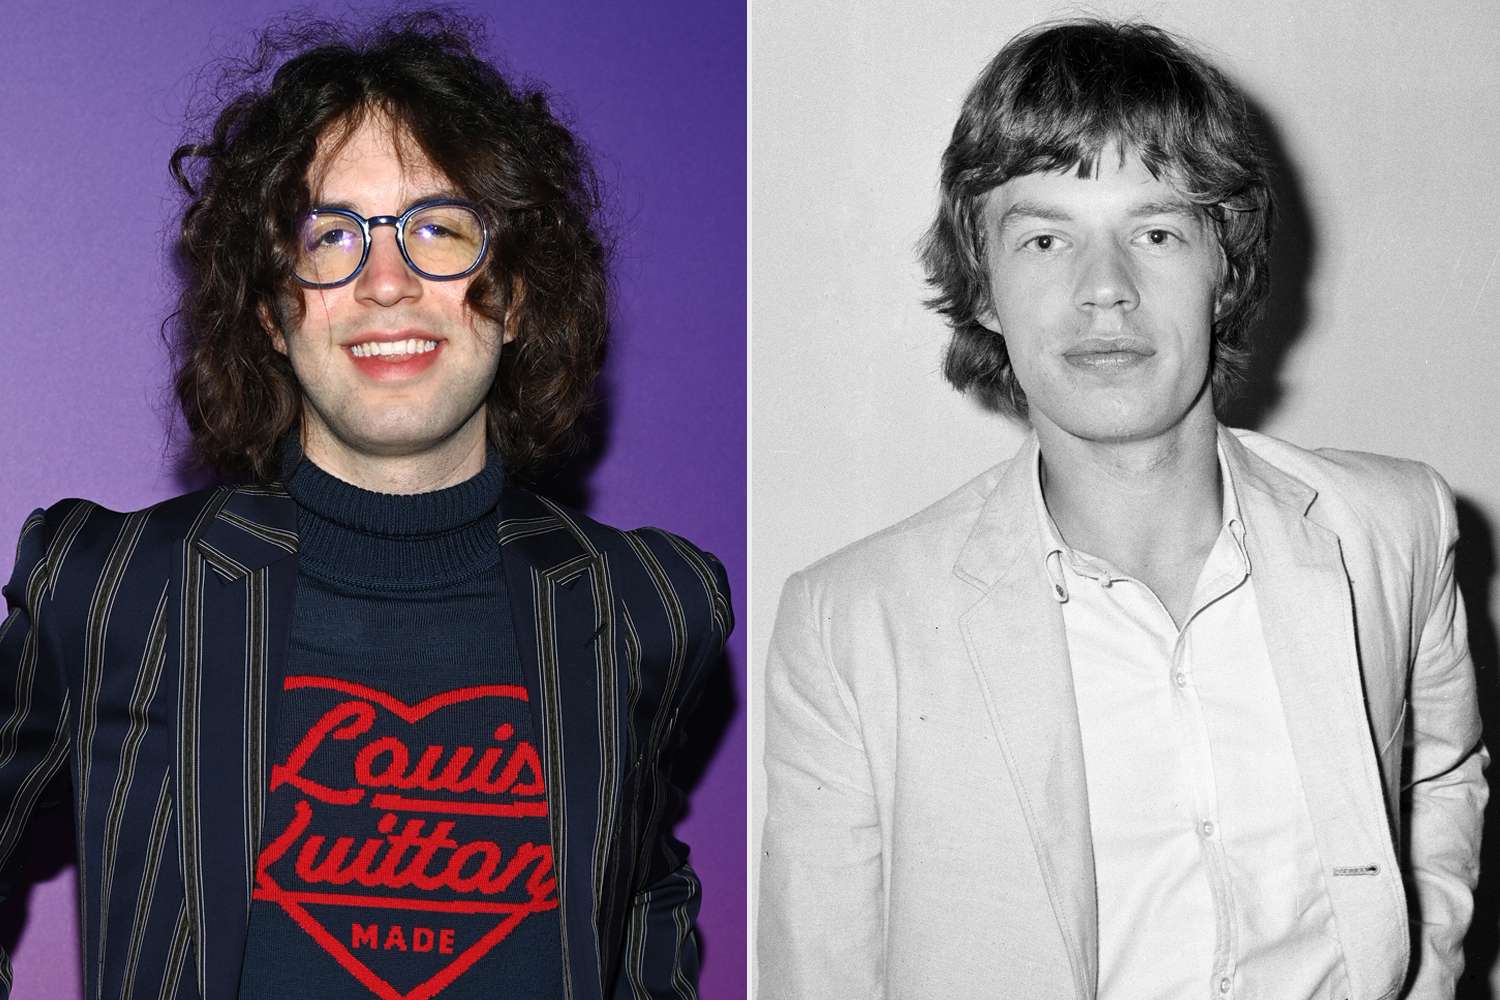 Lucas, the son of Mick Jagger, is the spitting image of his father at Paris Fashion Week